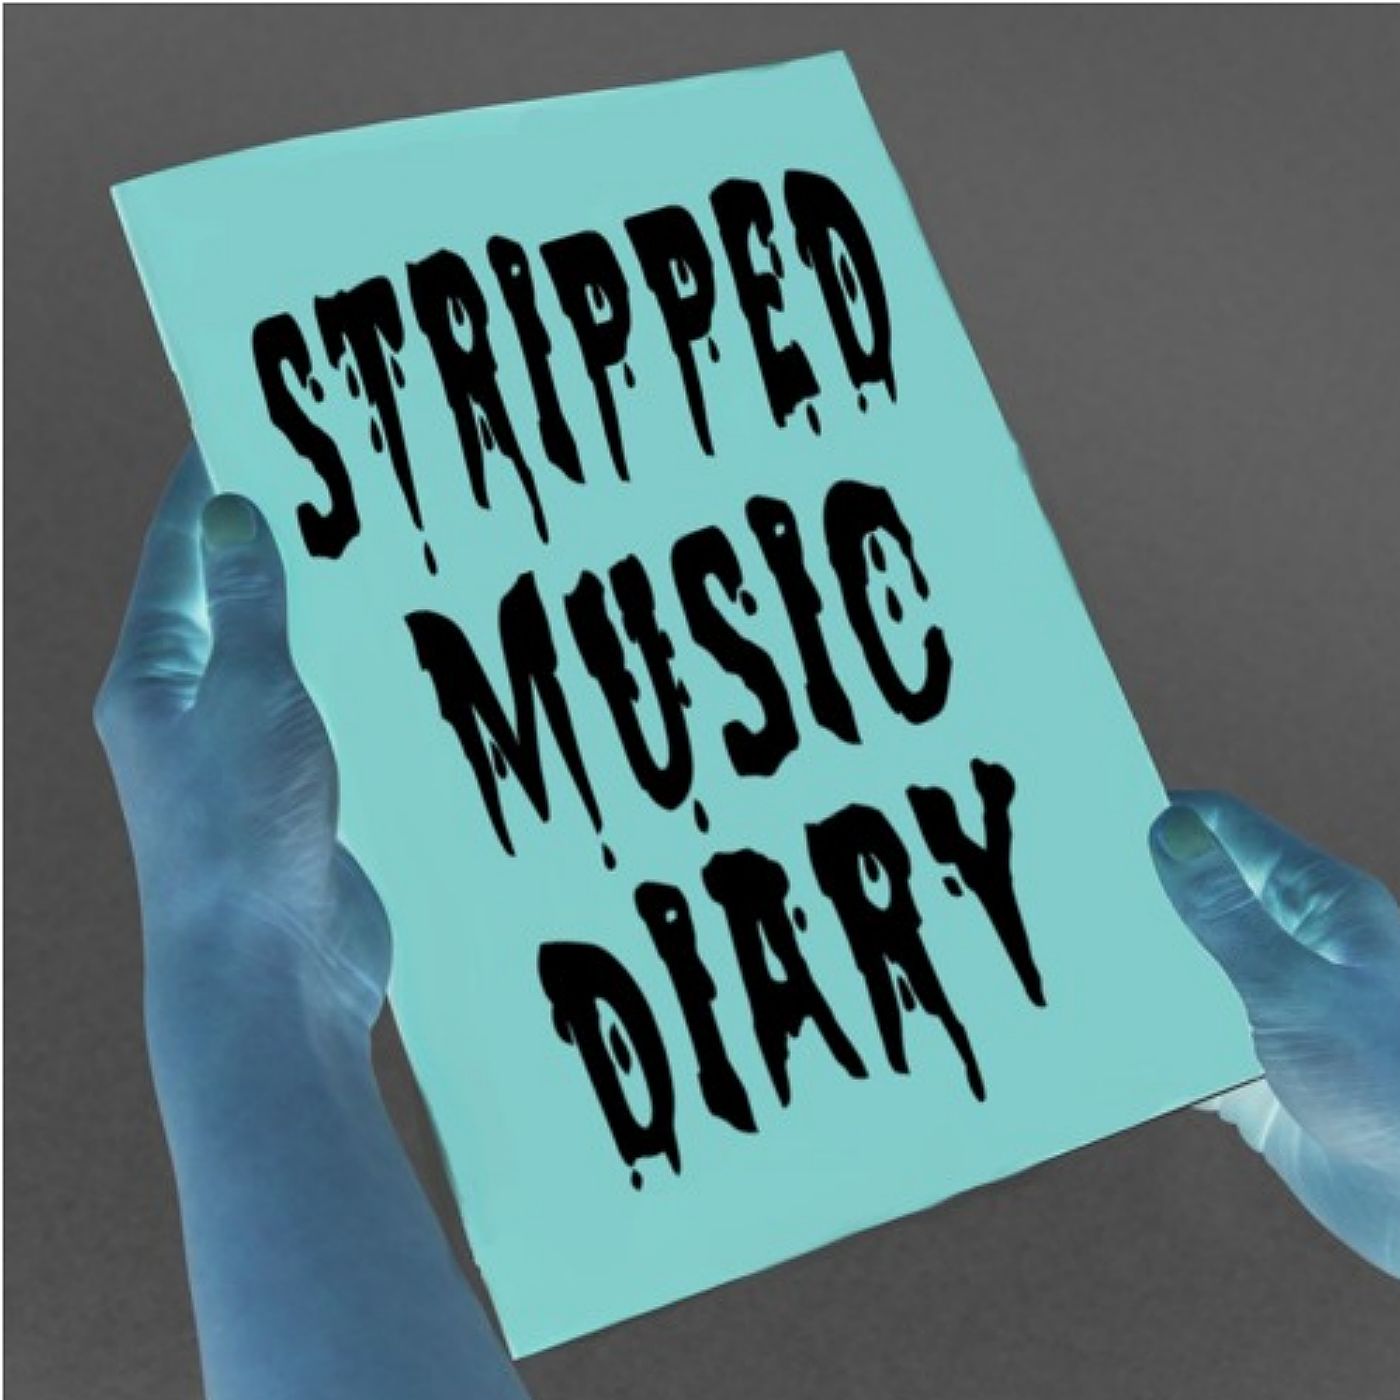 Stripped Music Diary Podcast